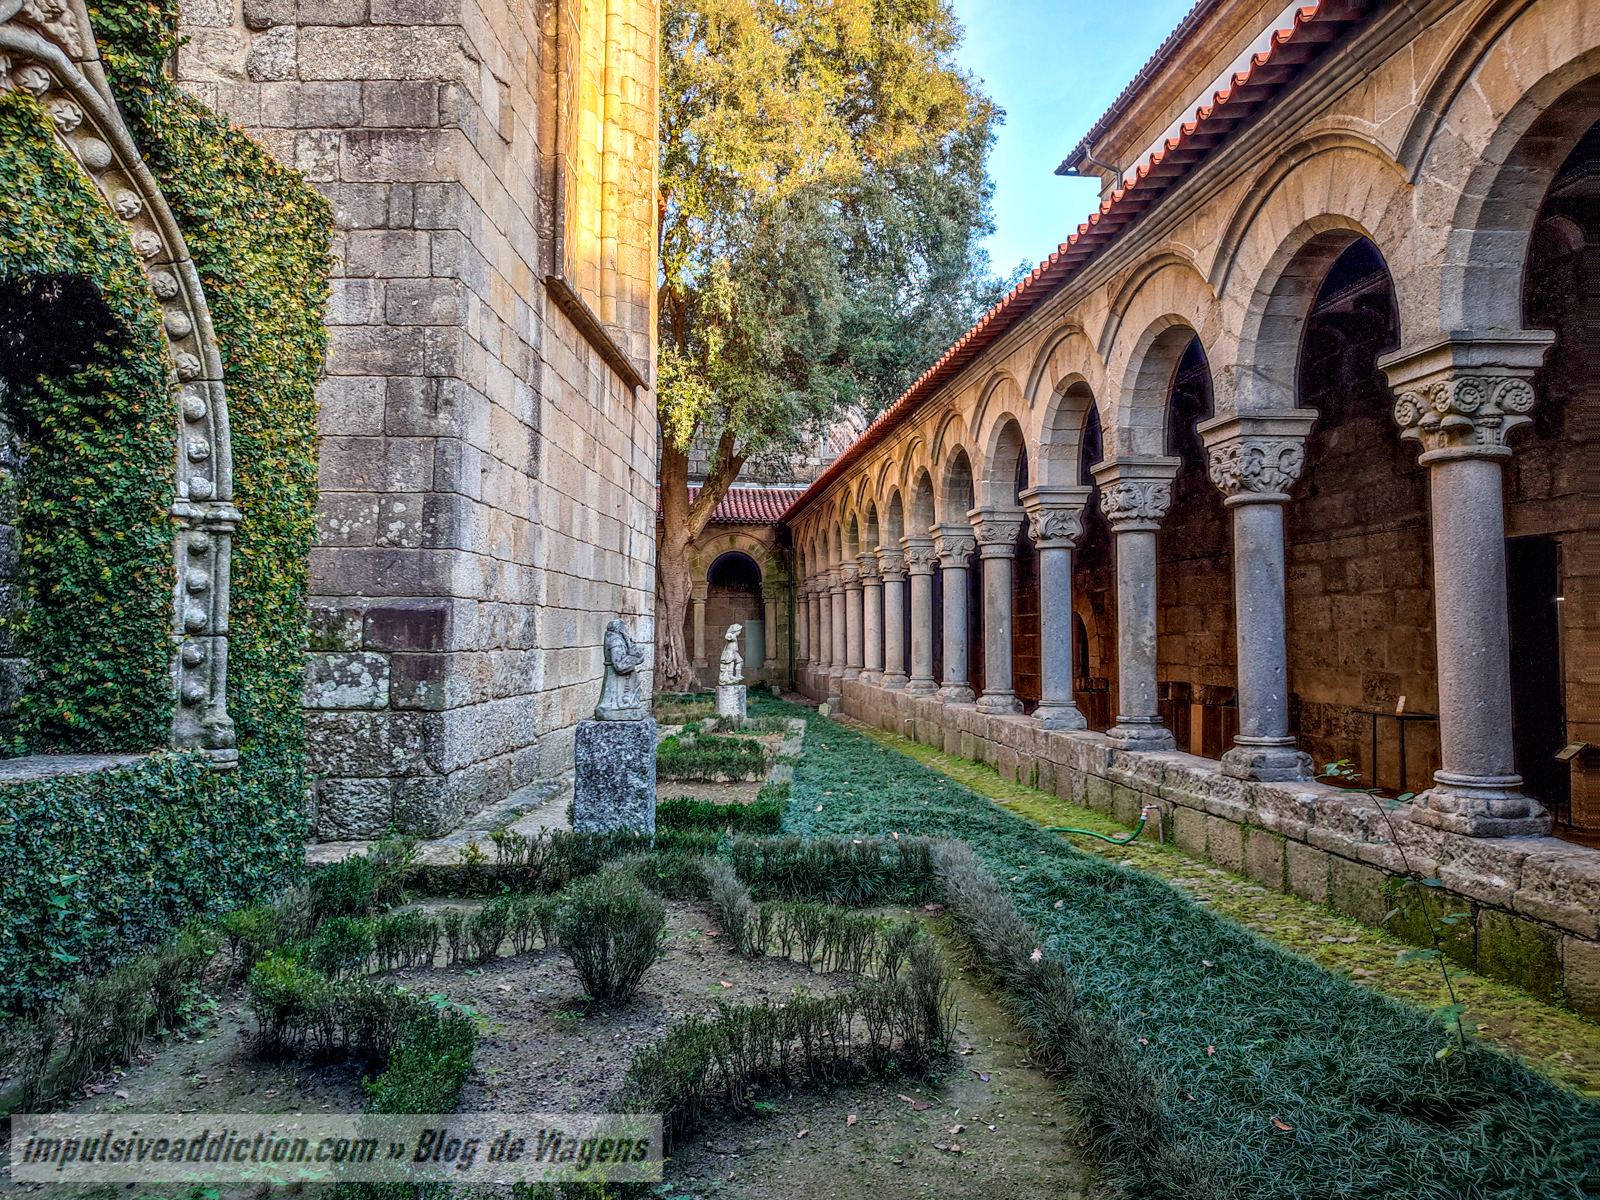 Cloister of the old Monastery of Guimarães